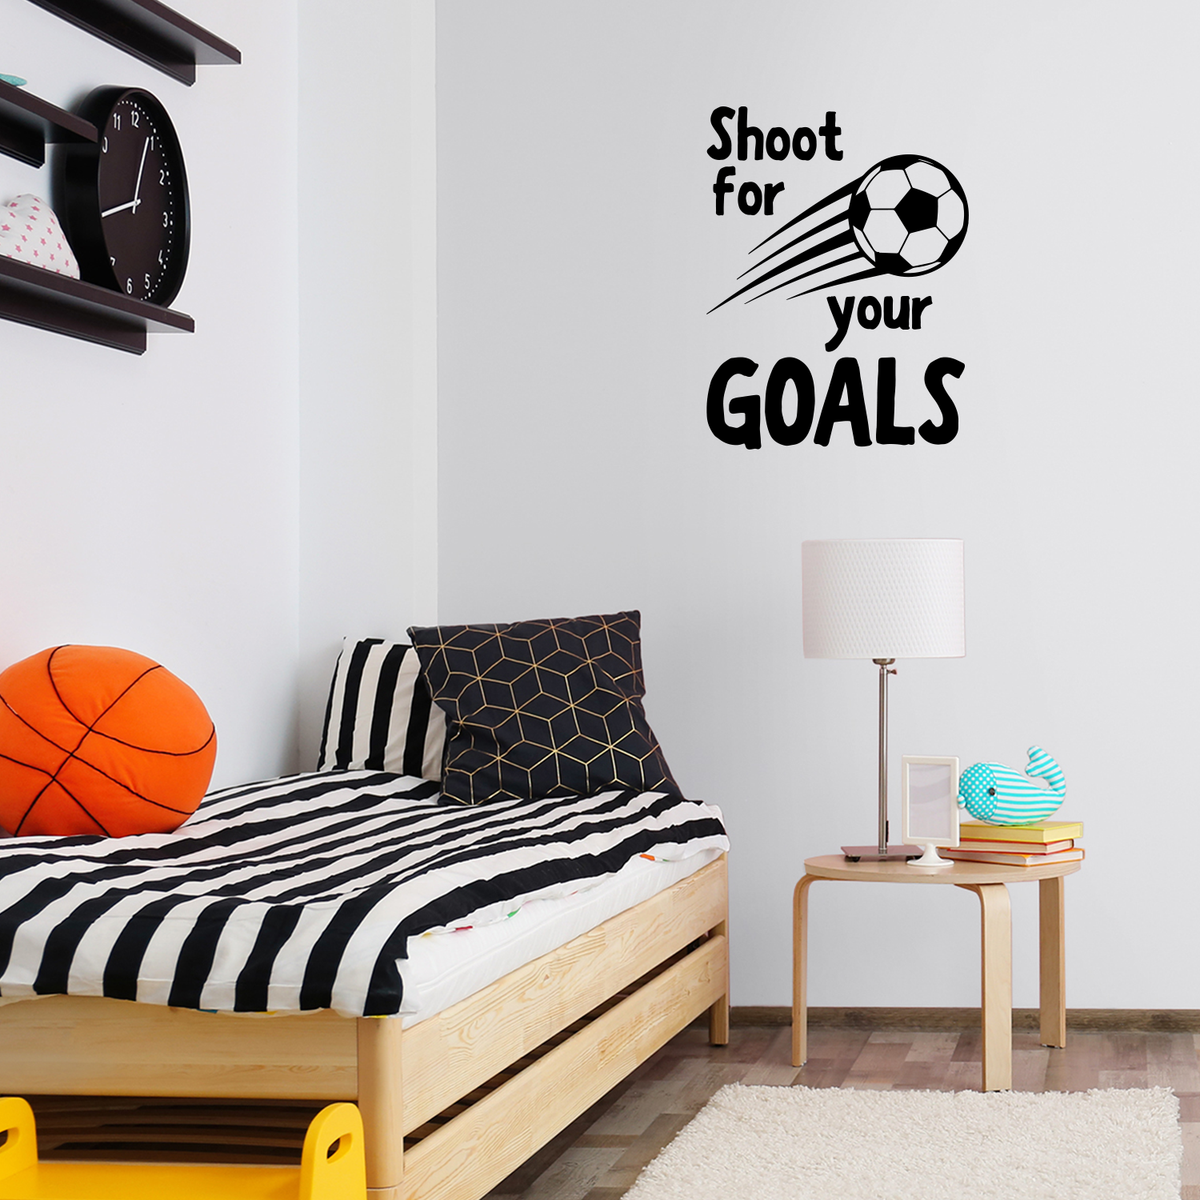 8 x 30, Black Design with Vinyl US V SOS 1011 2 Top Selling Decals Make Meaningful Goals Wall Art Size 8 Inches X 30 Inches Color 